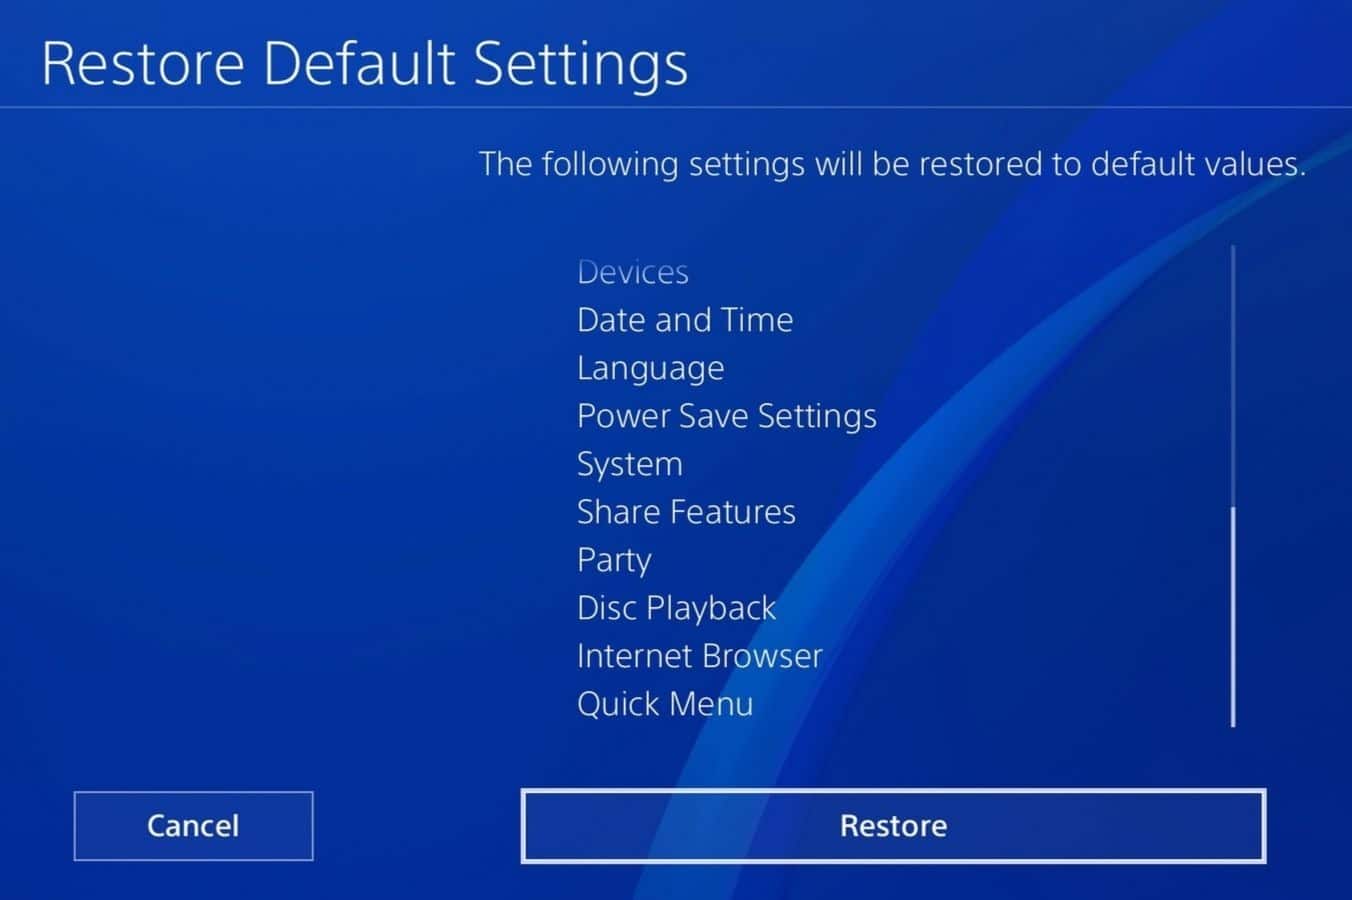 Restore default settings PS4 to fix unable to connect to EA servers error